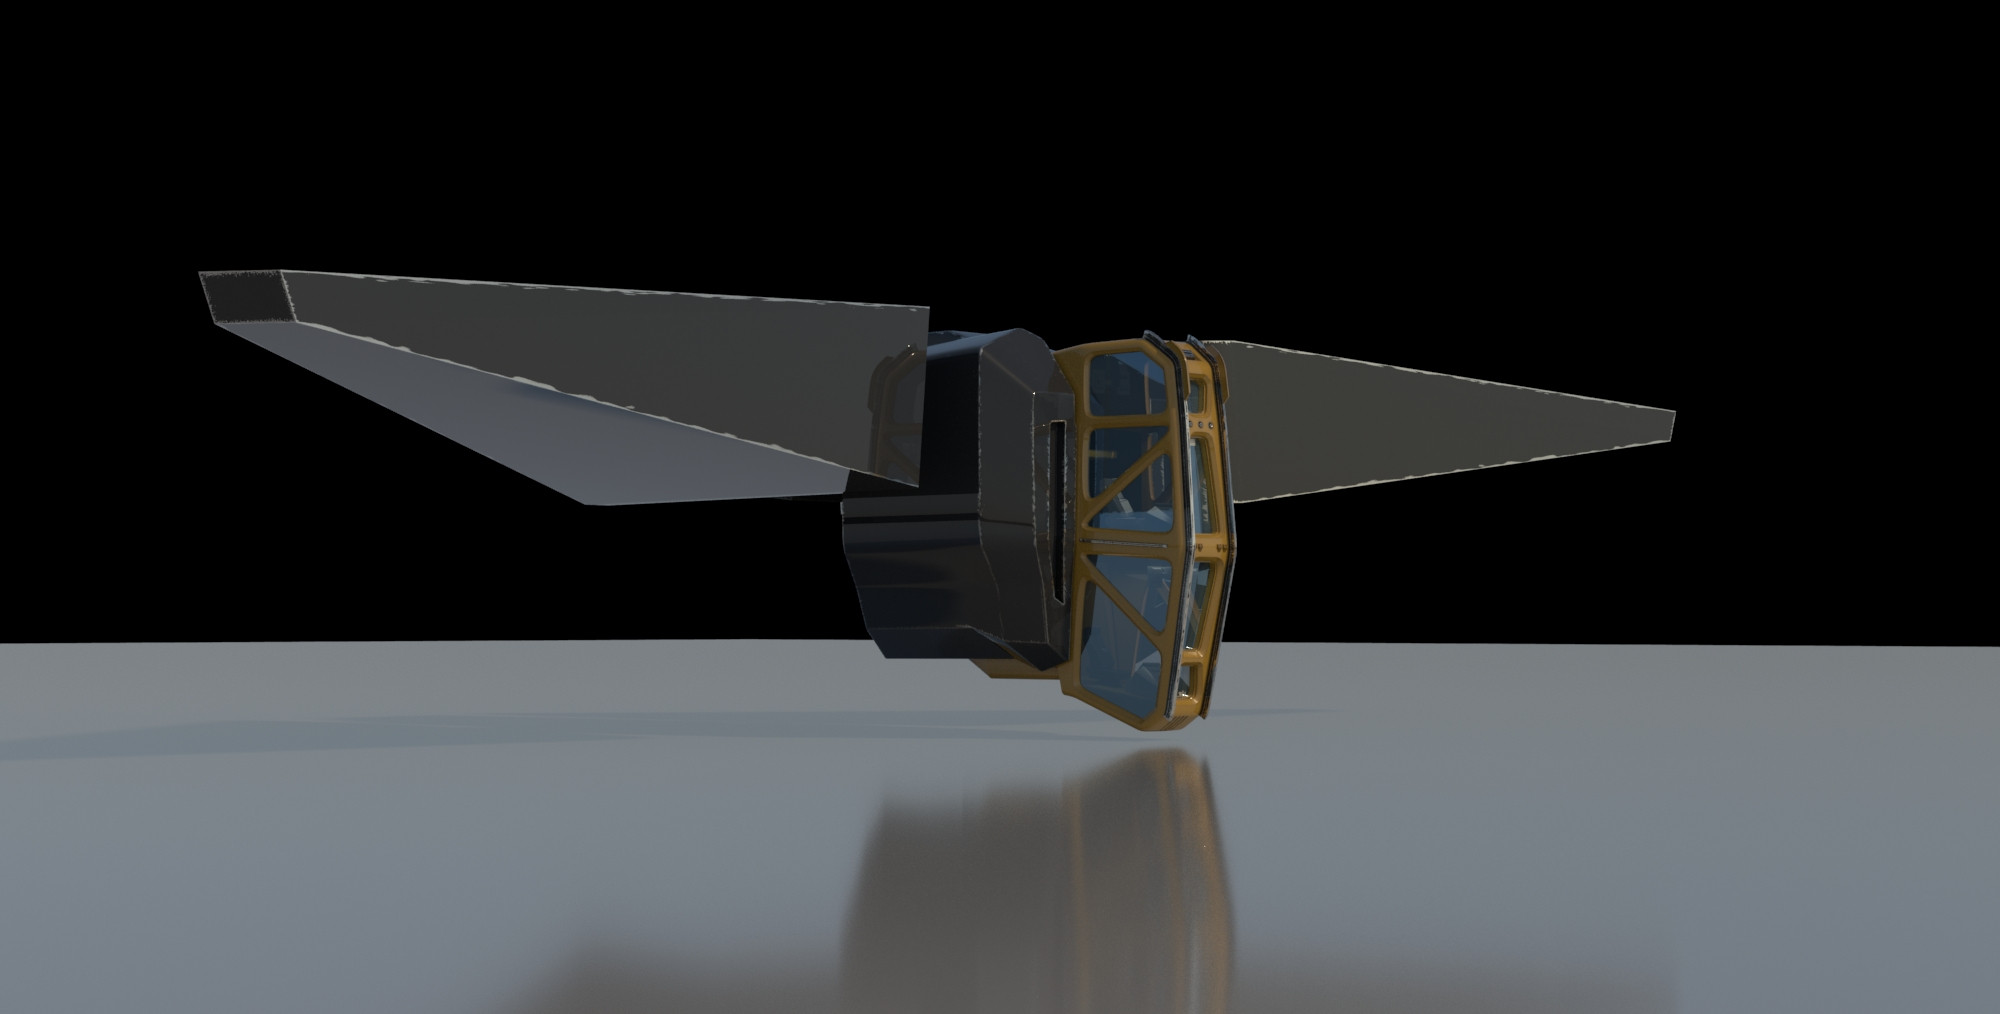 extend the design concept a bit by add some hull blockout